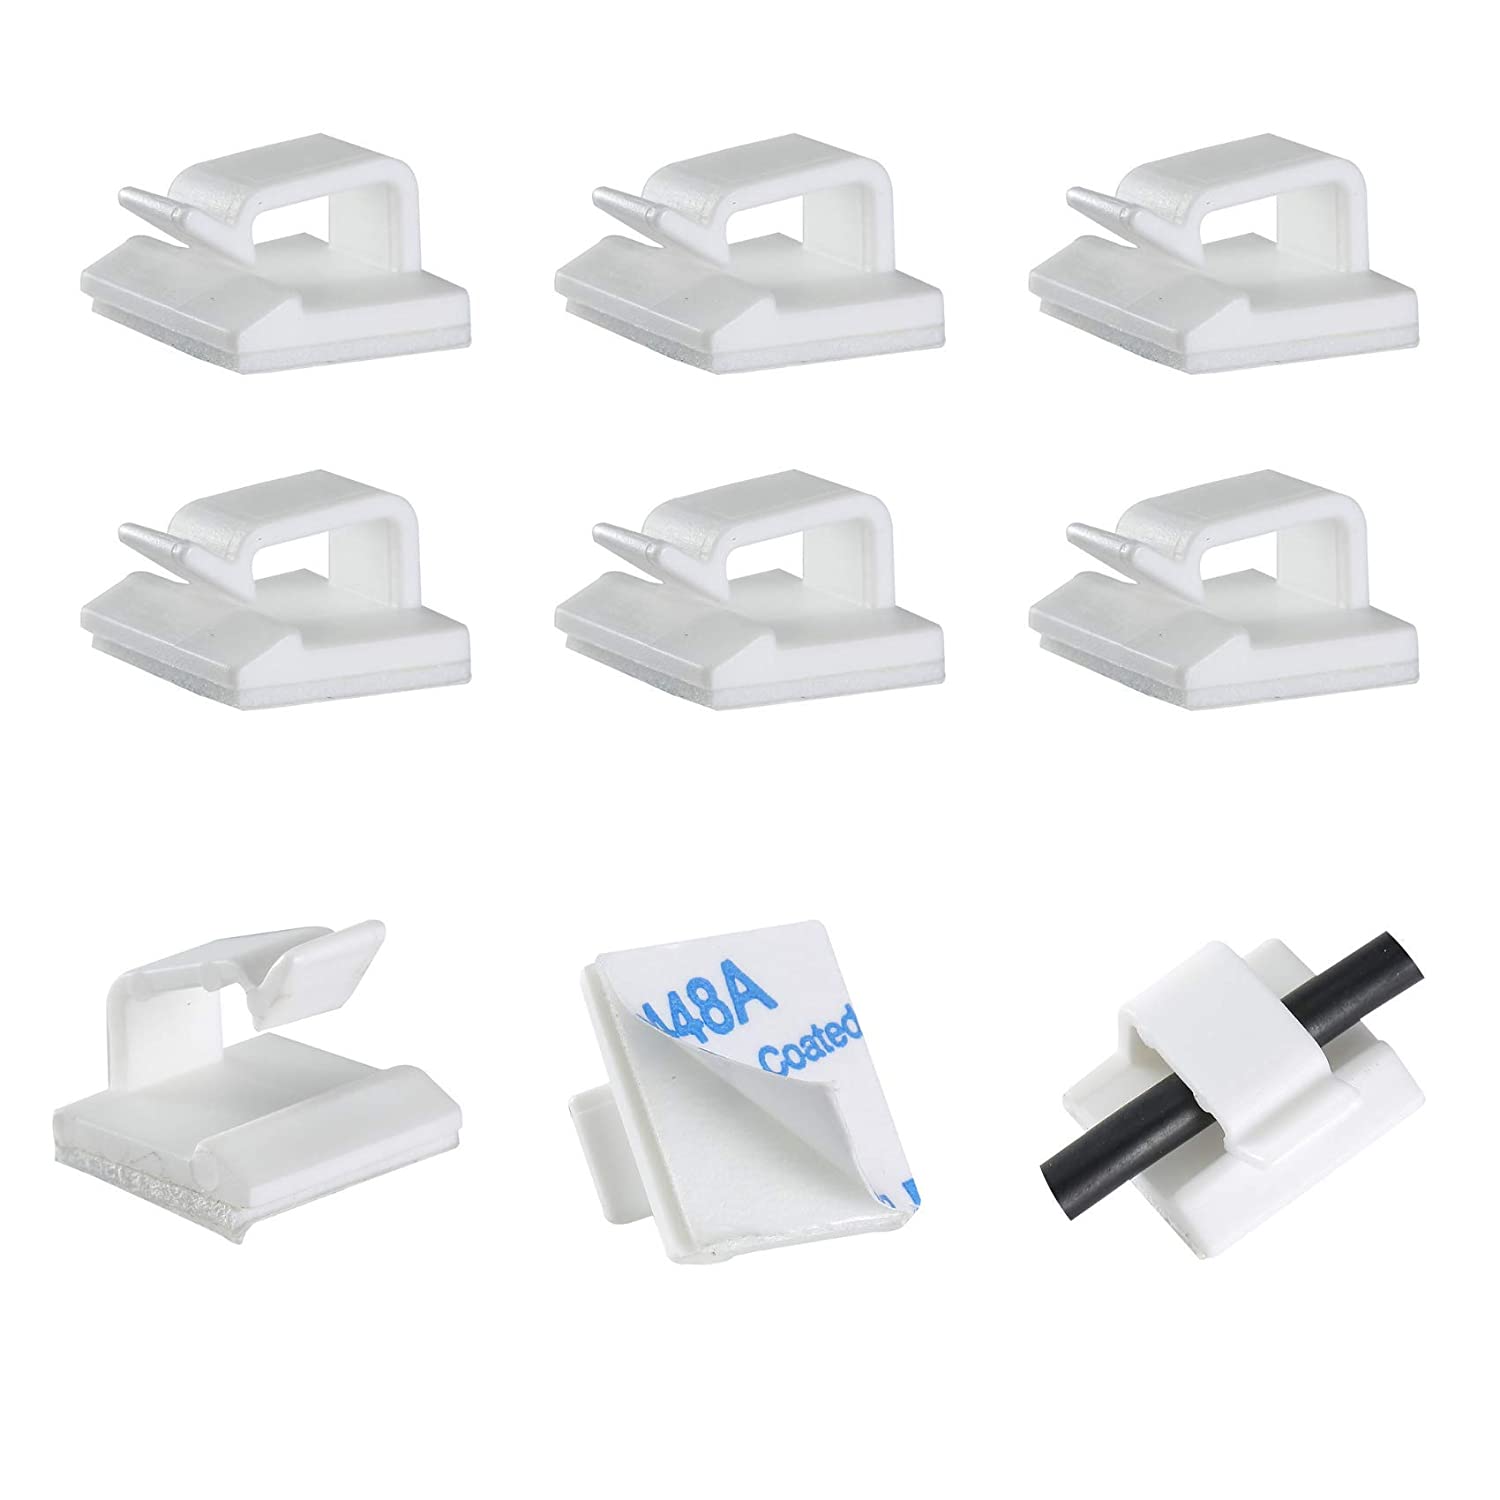 Bates- Cable Clips, 30 Pack, White, Cable Clip, Wire Holders, Cord Holder,  Wire Hooks, Cord Clips - Bates Choice